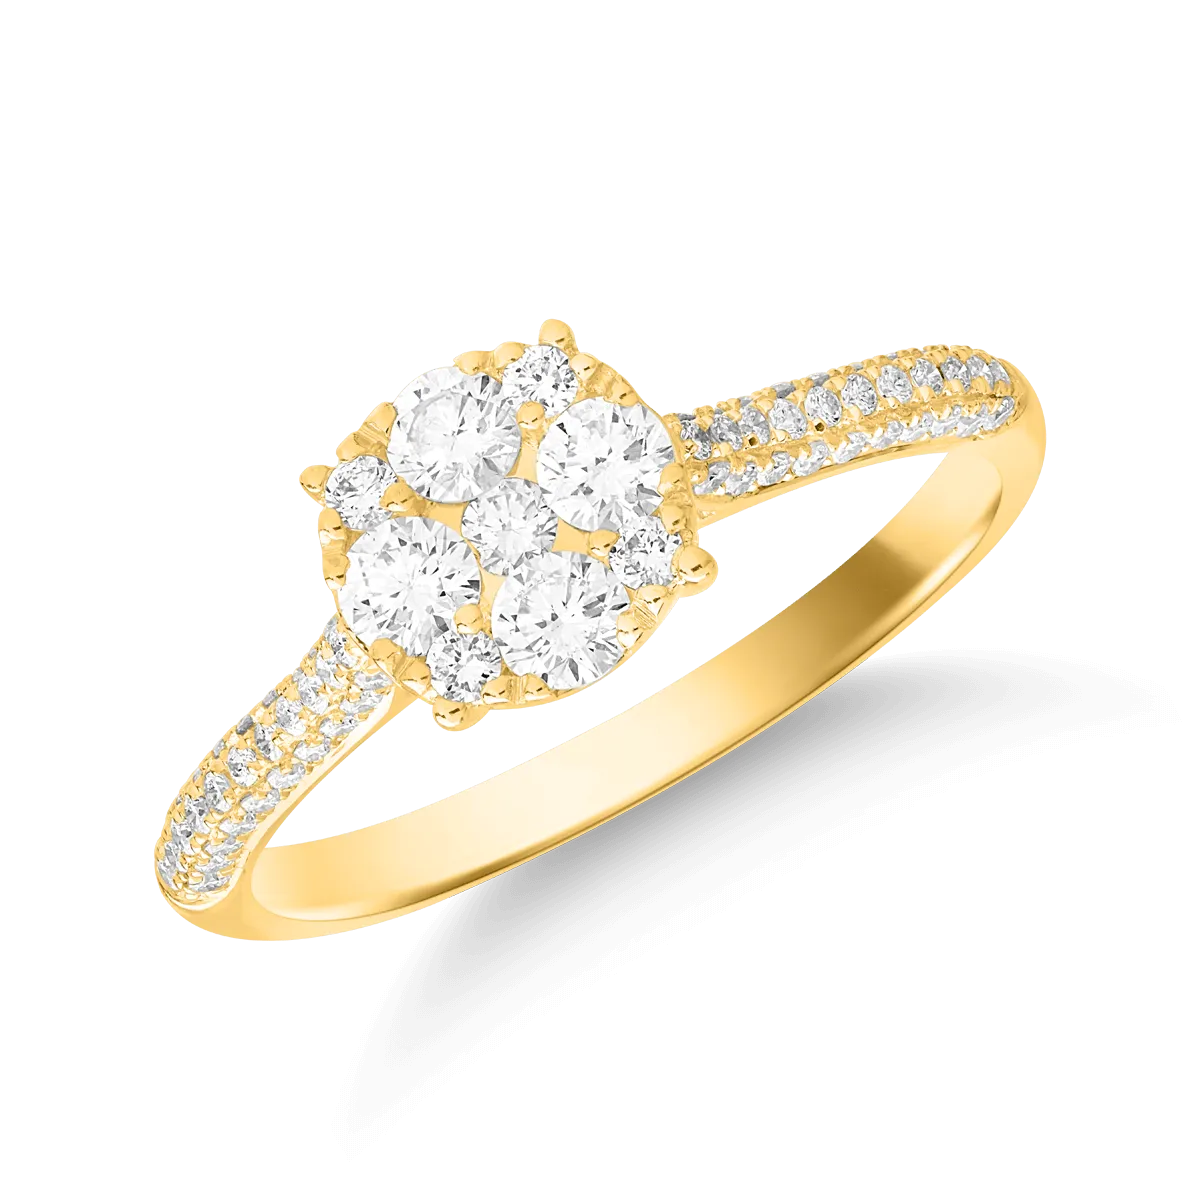 18K yellow gold ring with 0.52ct diamond